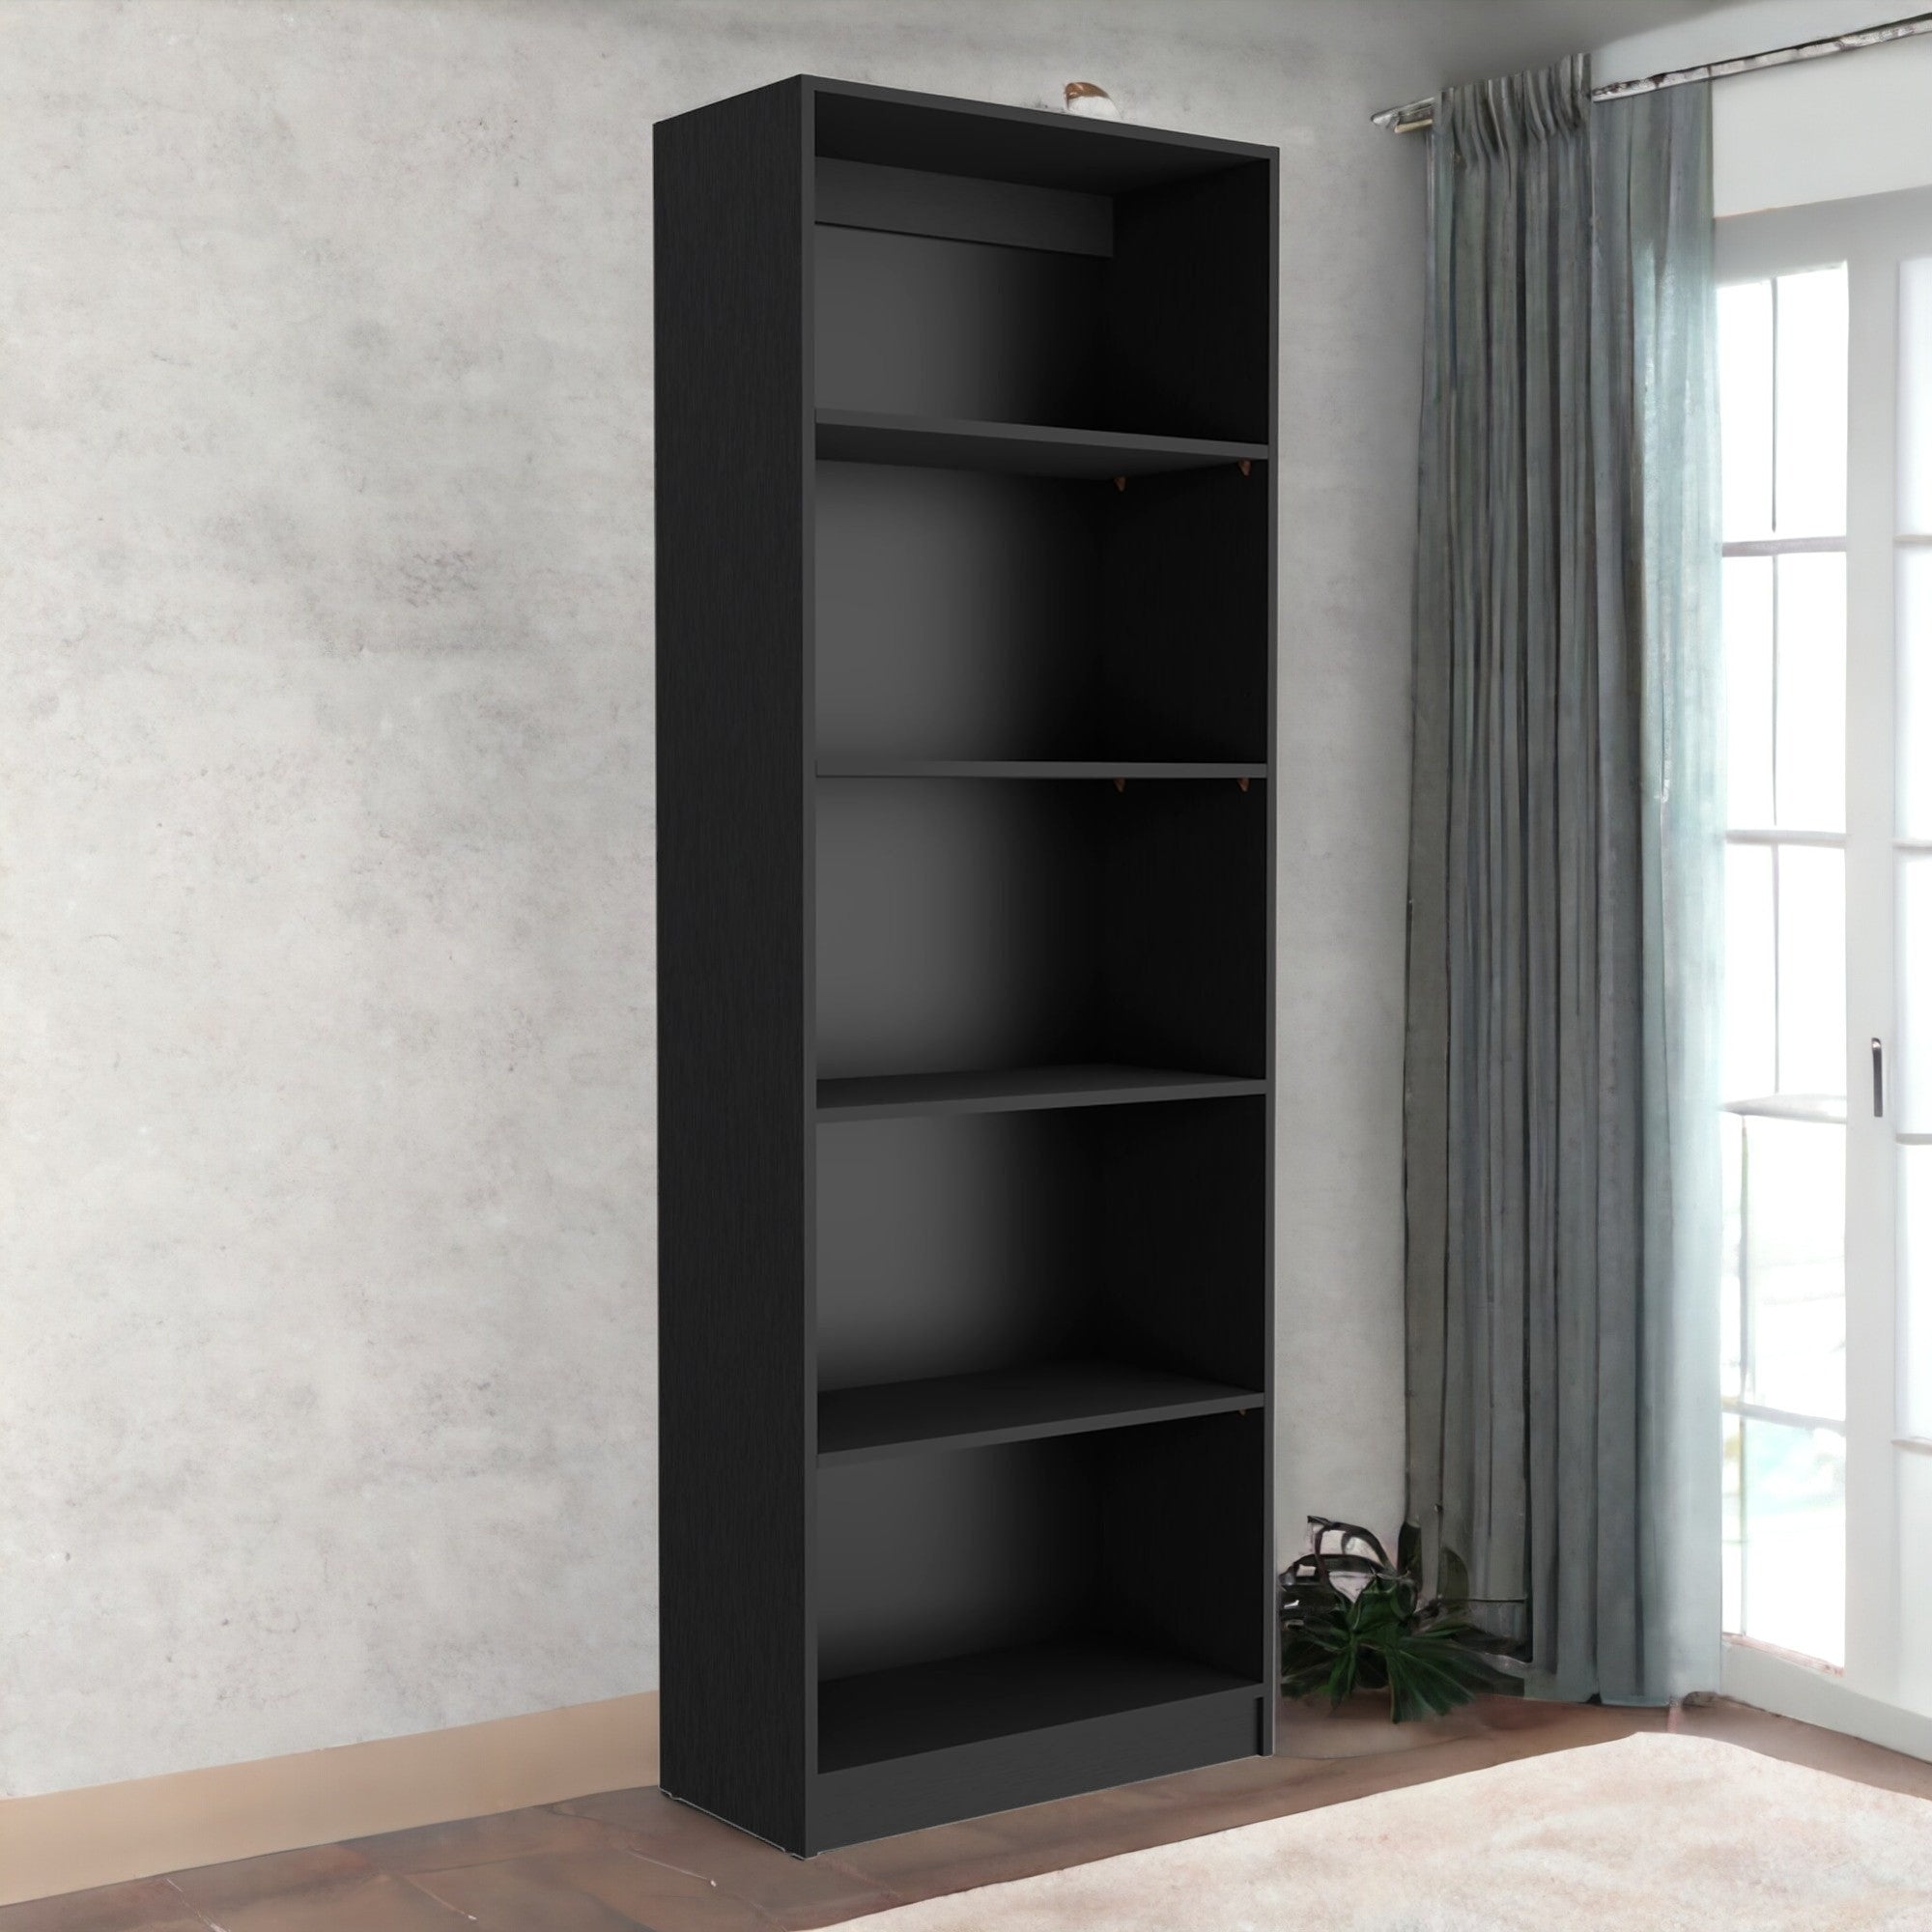 71" Black Five Tier Bookcase with Two doors